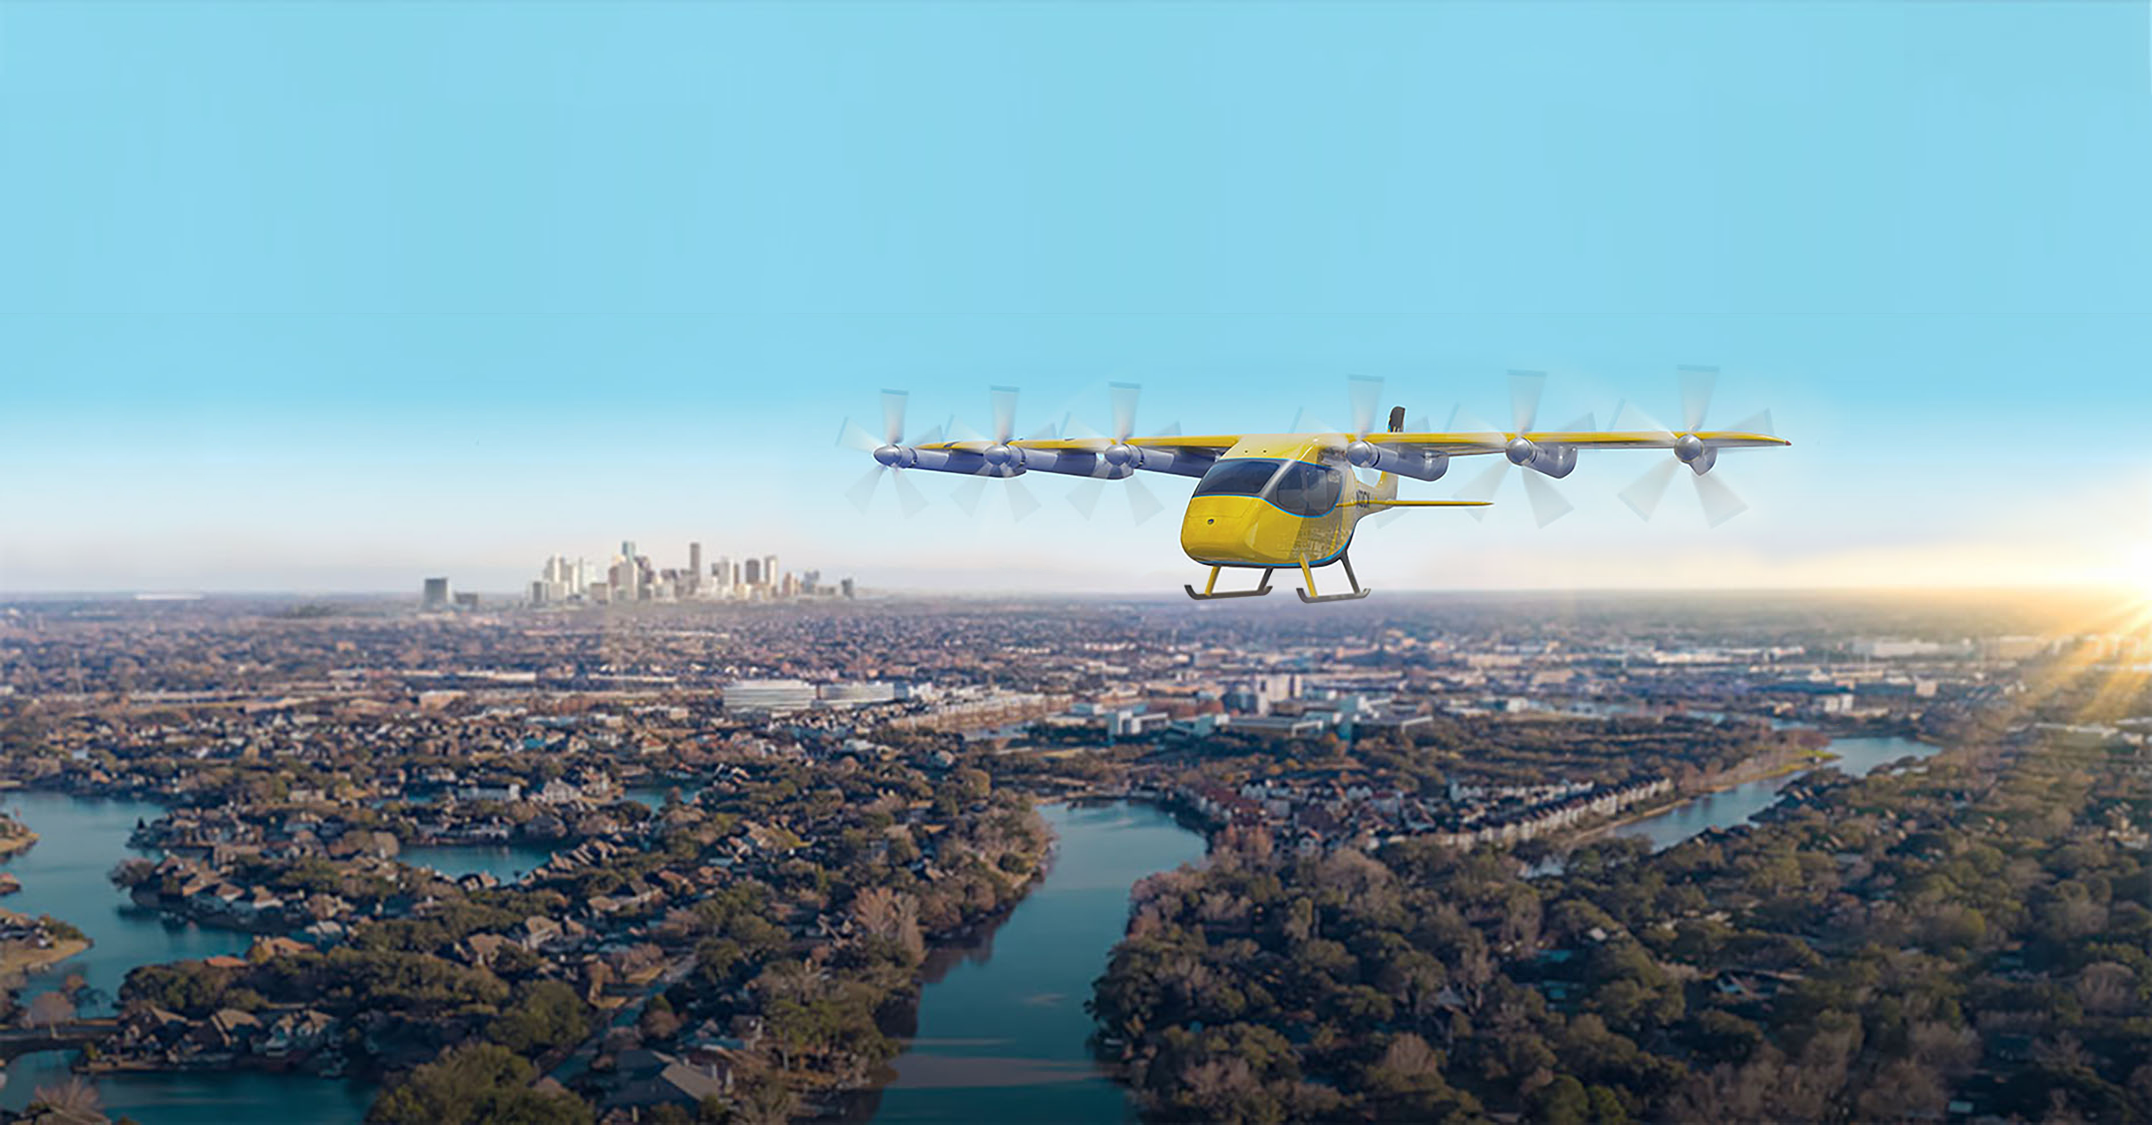 Wisk and the City of Sugar Land, Texas, Partner to Bring Autonomous Air Taxis to the Greater Houston Region